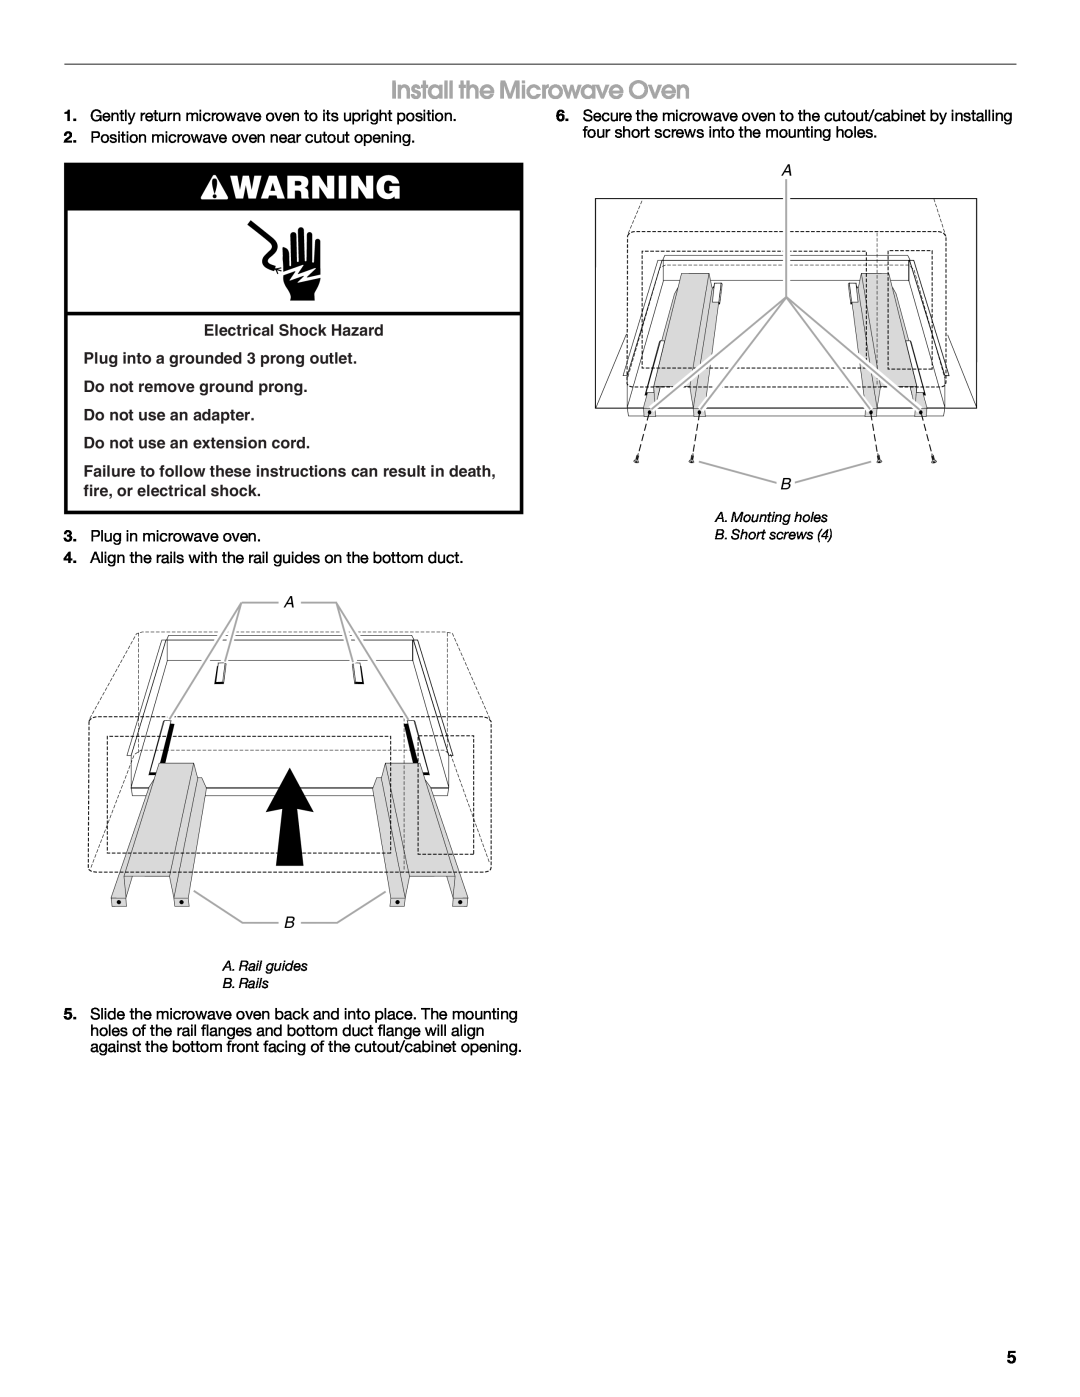 Whirlpool MK2167 installation instructions Install the Microwave Oven 